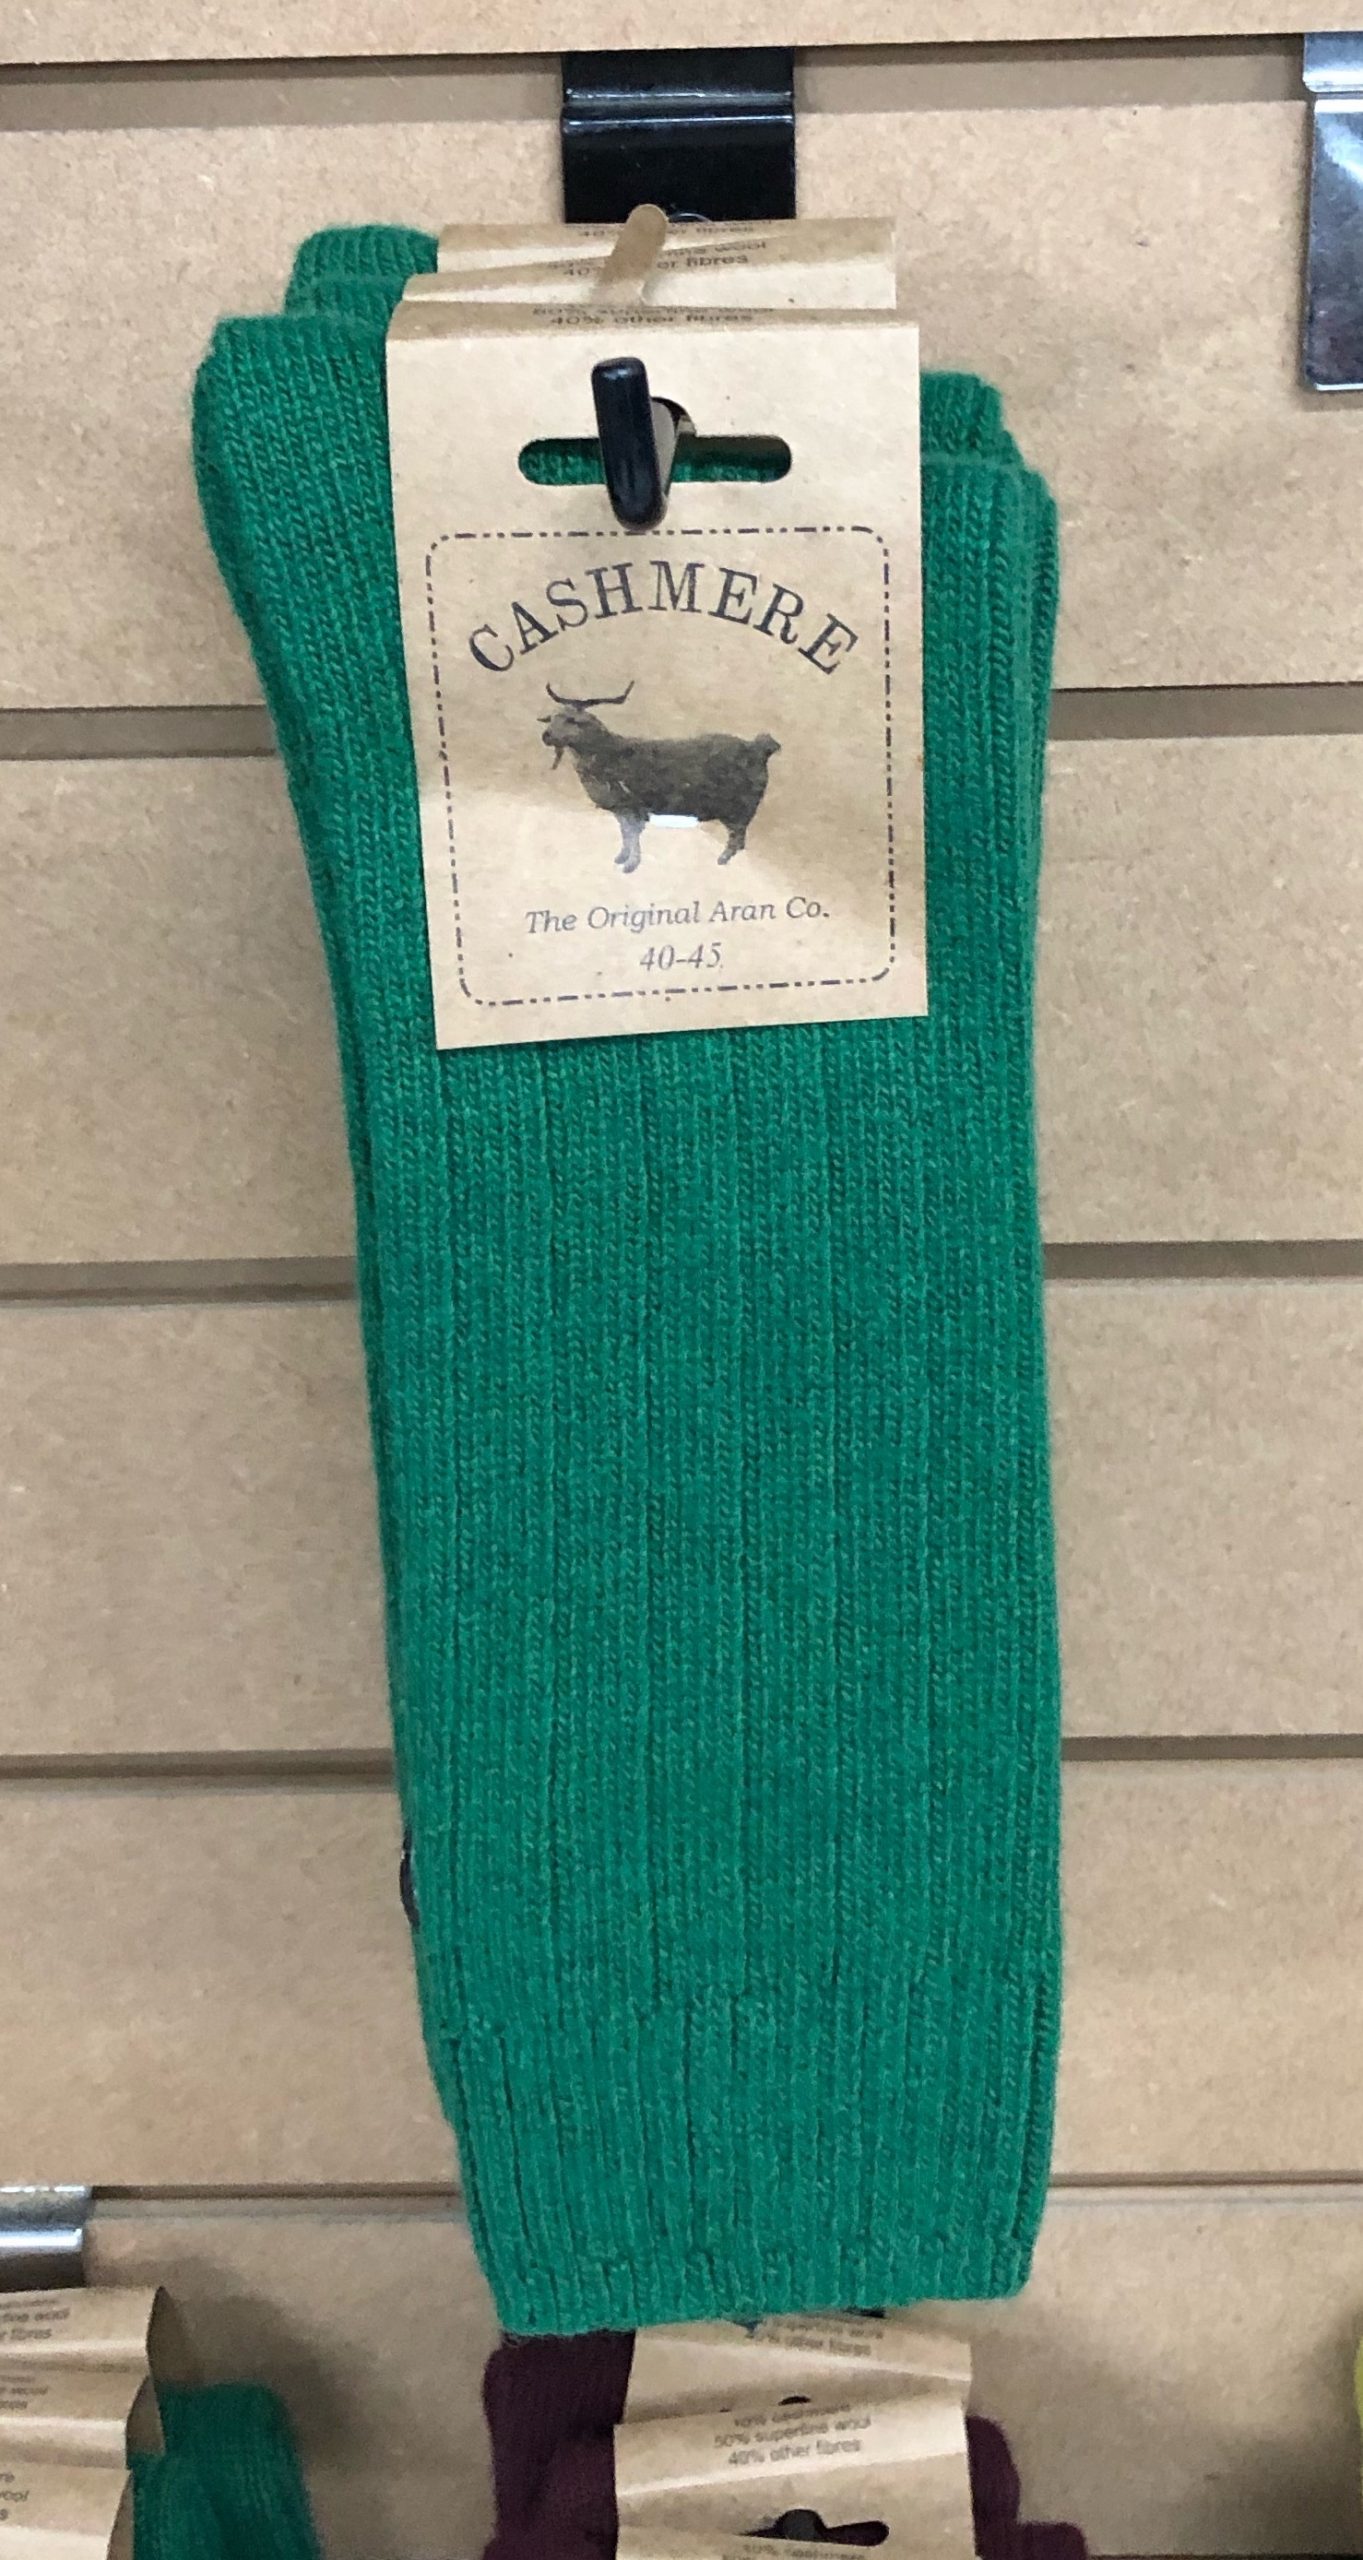 Cashmere and Wool Bright Green Socks in Size 7-11